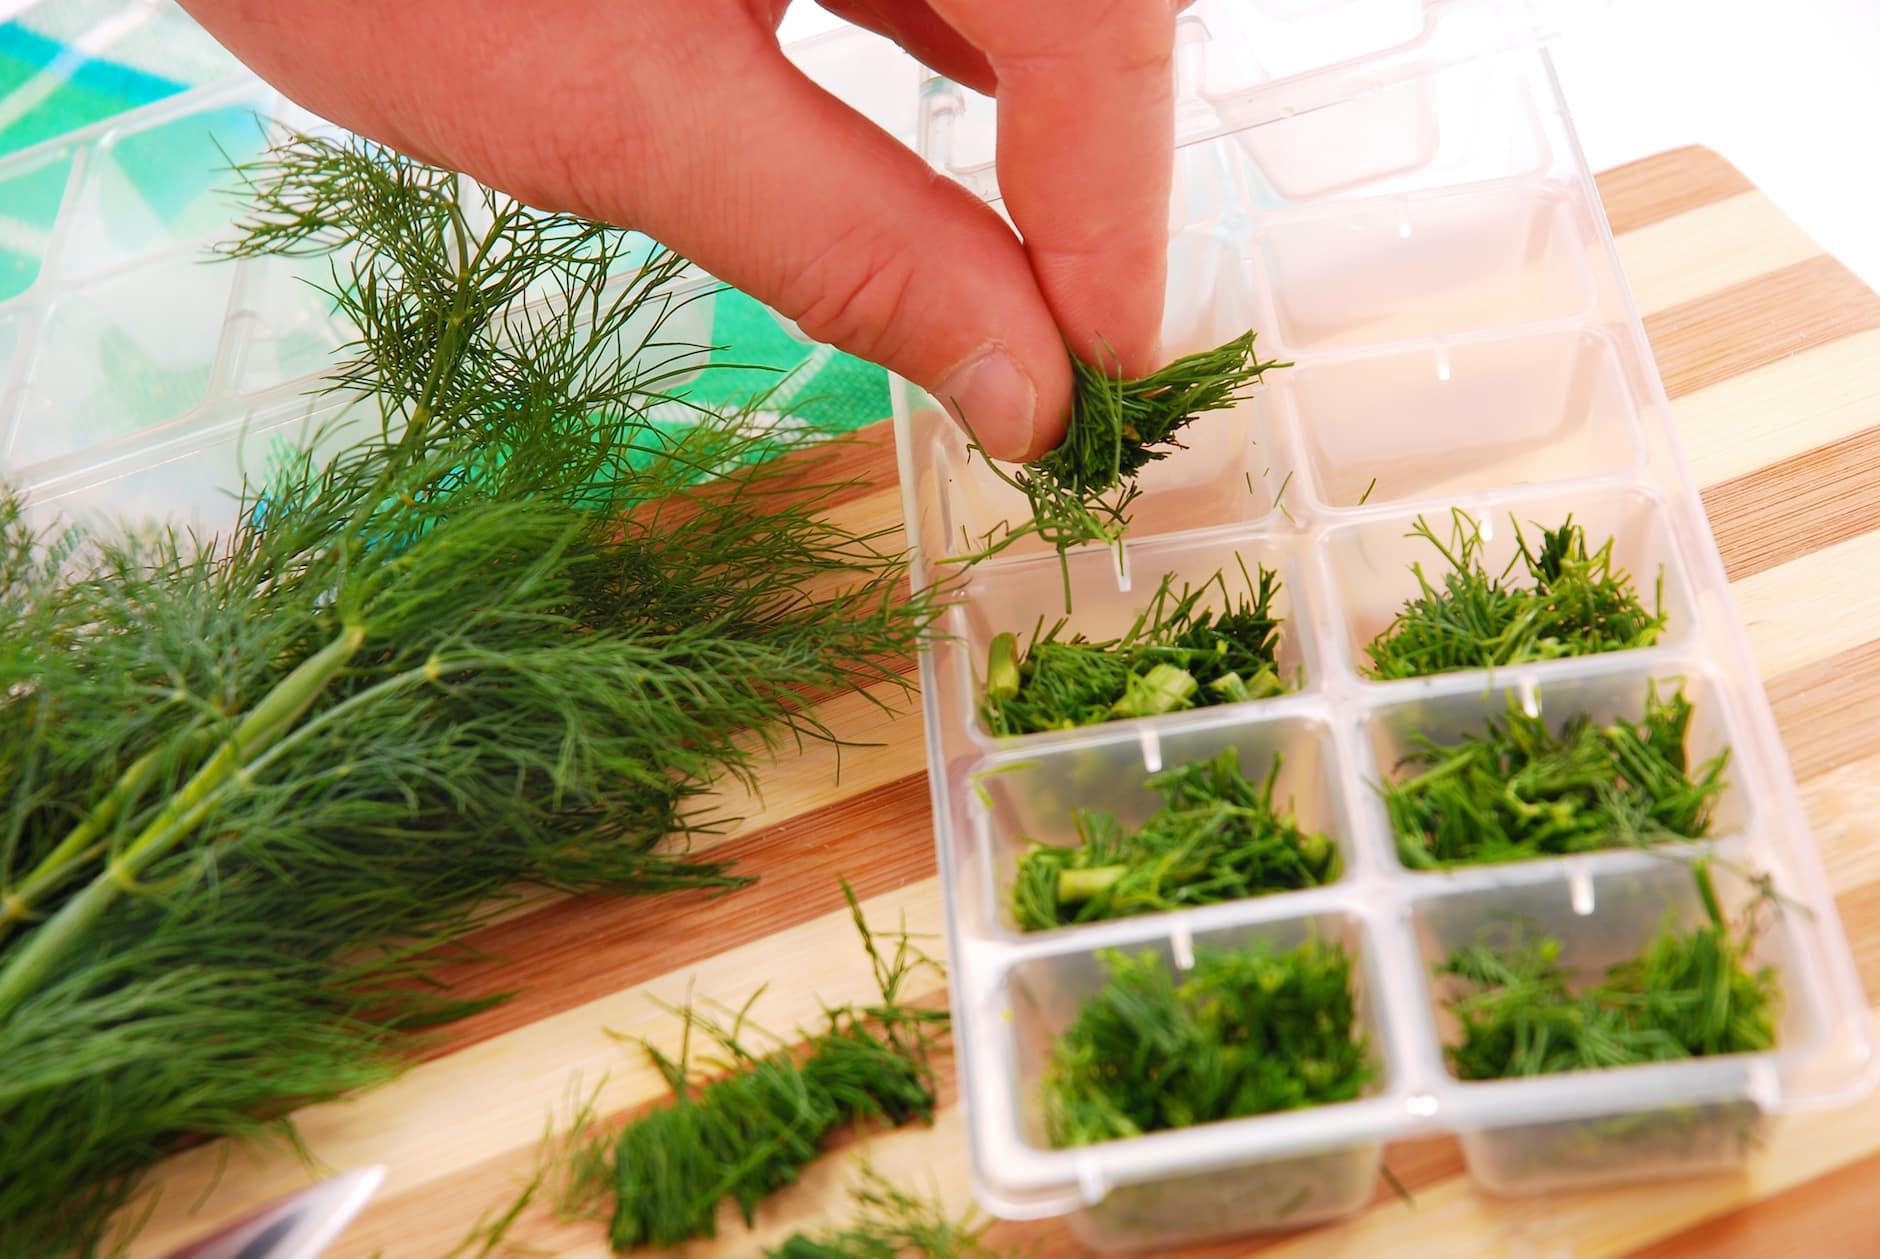 Herbs being put into containers for freezing.